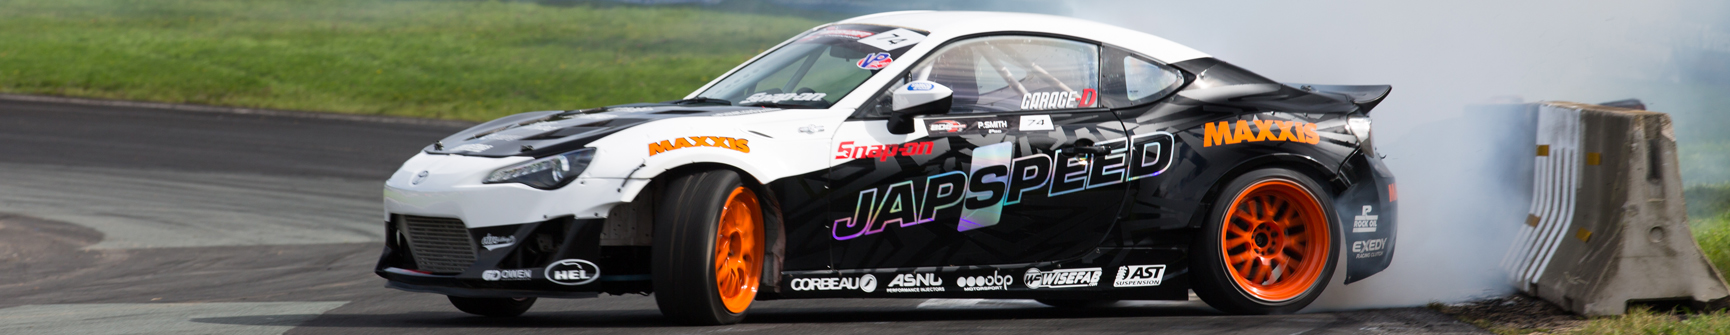 Maxxis Sponsor It’s A Drift Life in 2014 Championships